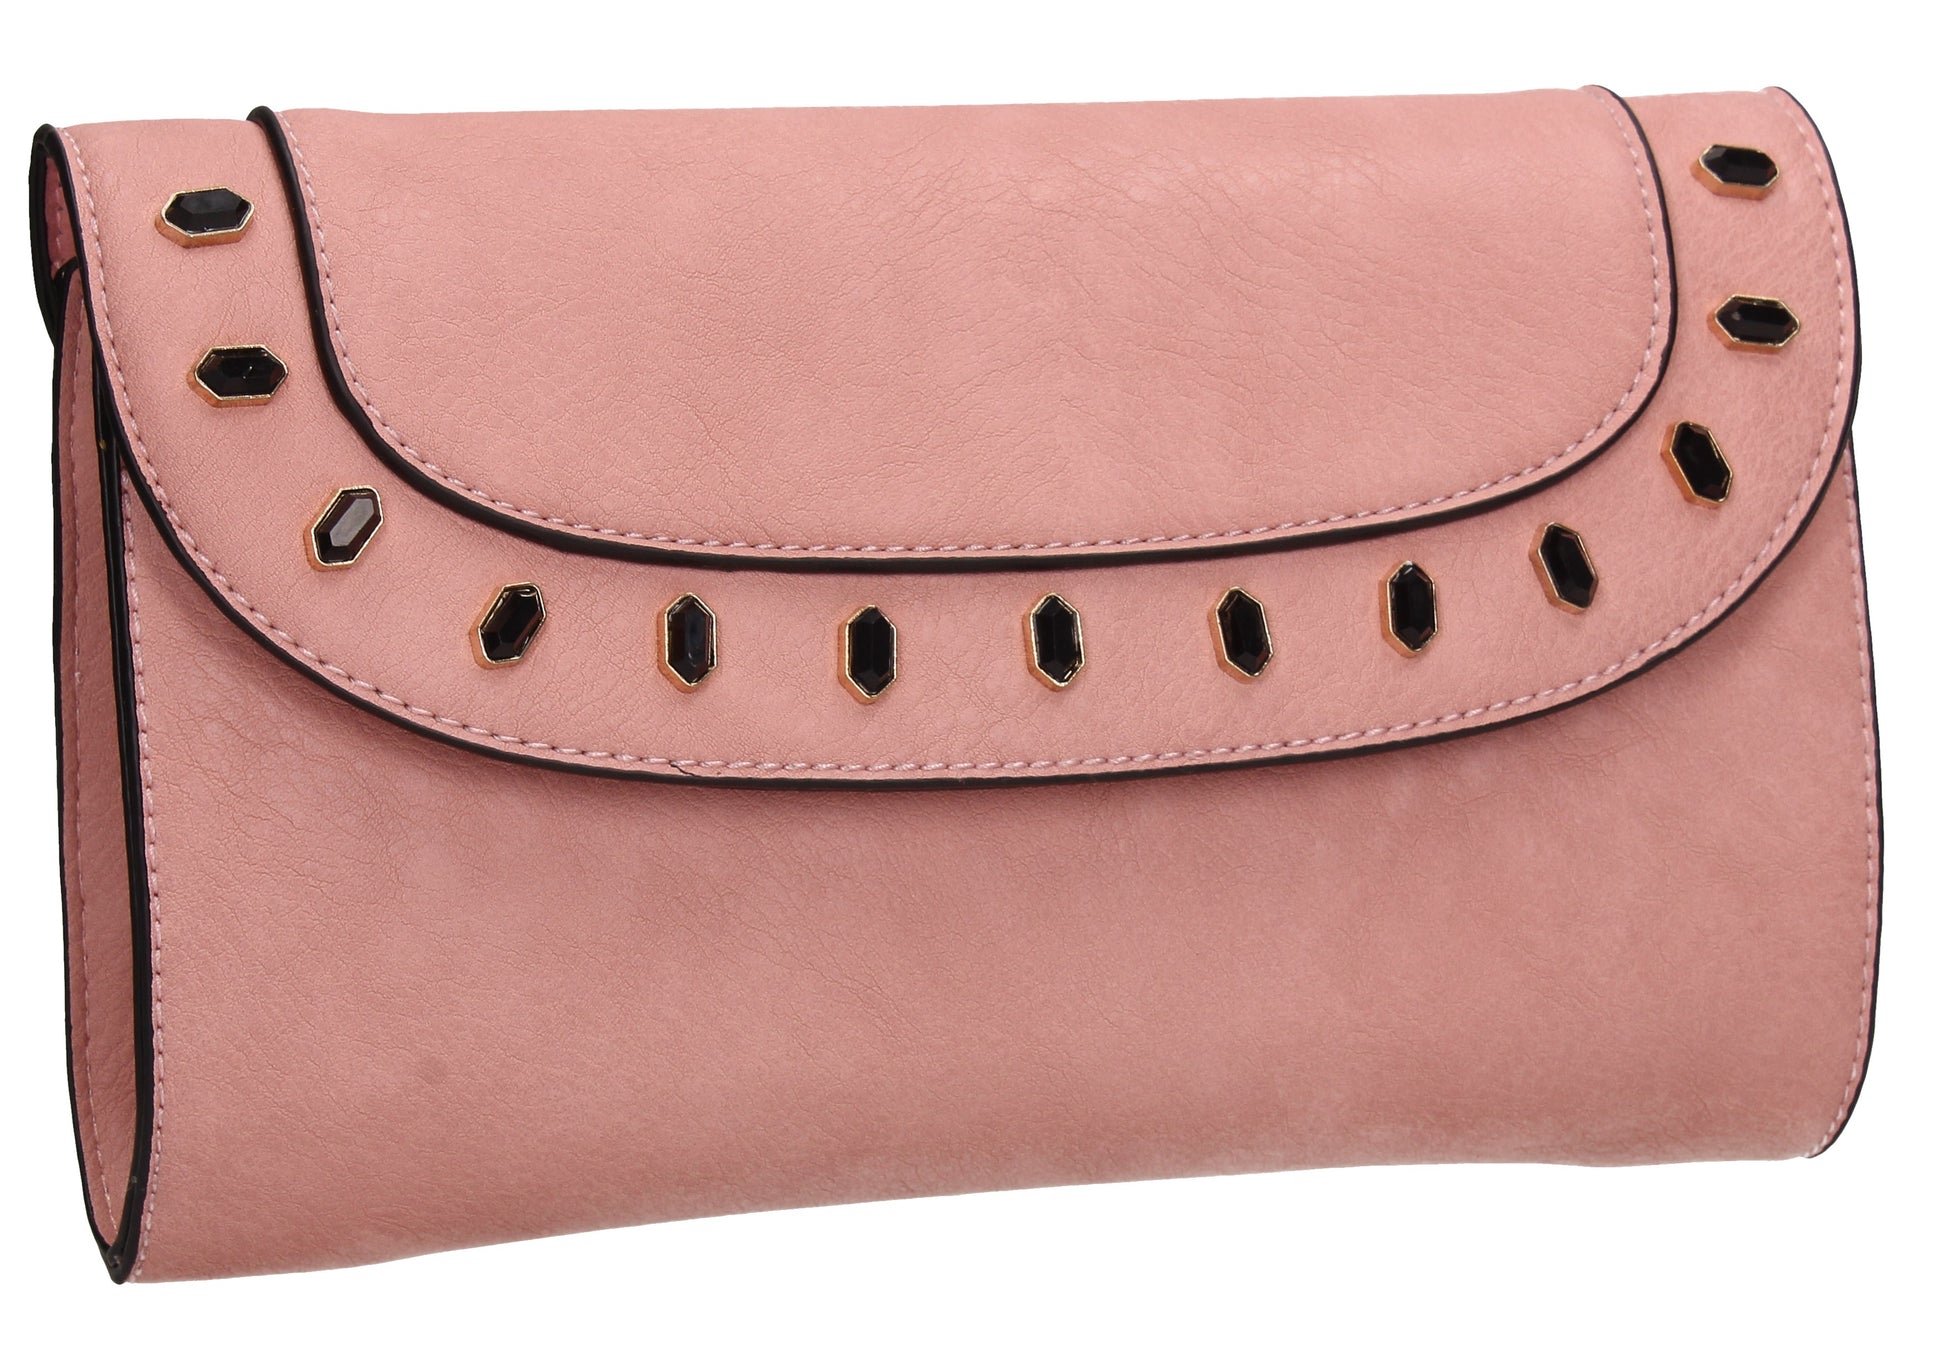 SWANKYSWANS Tiare Onyx Style Clutch Bag Pink Cute Cheap Clutch Bag For Weddings School and Work